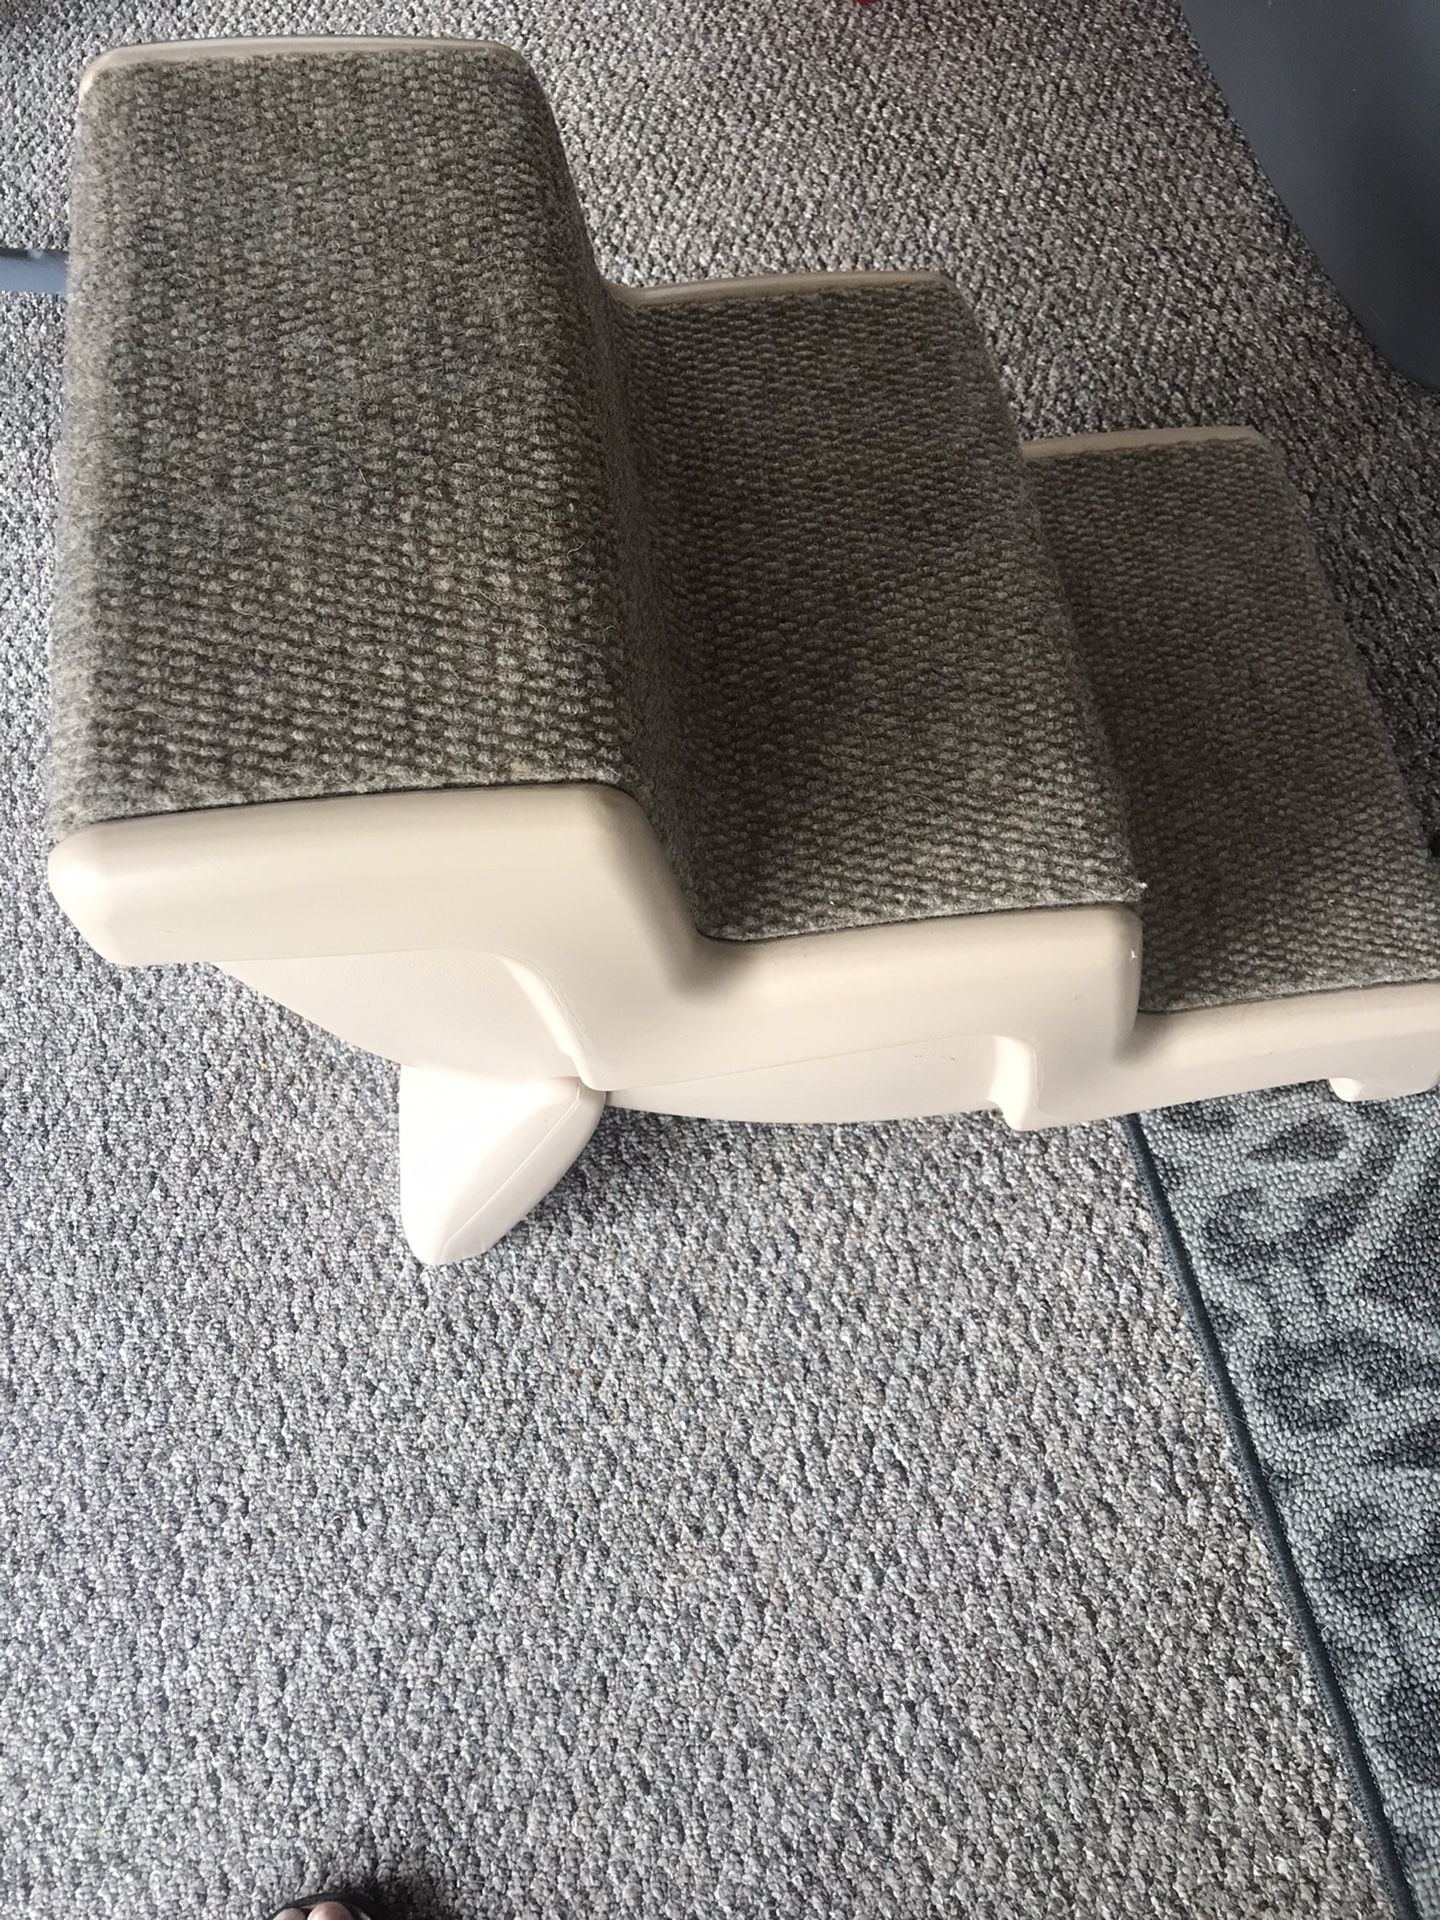 DOG  STEPS   For  Sale    $ 25.00 Porch pick up Only) 